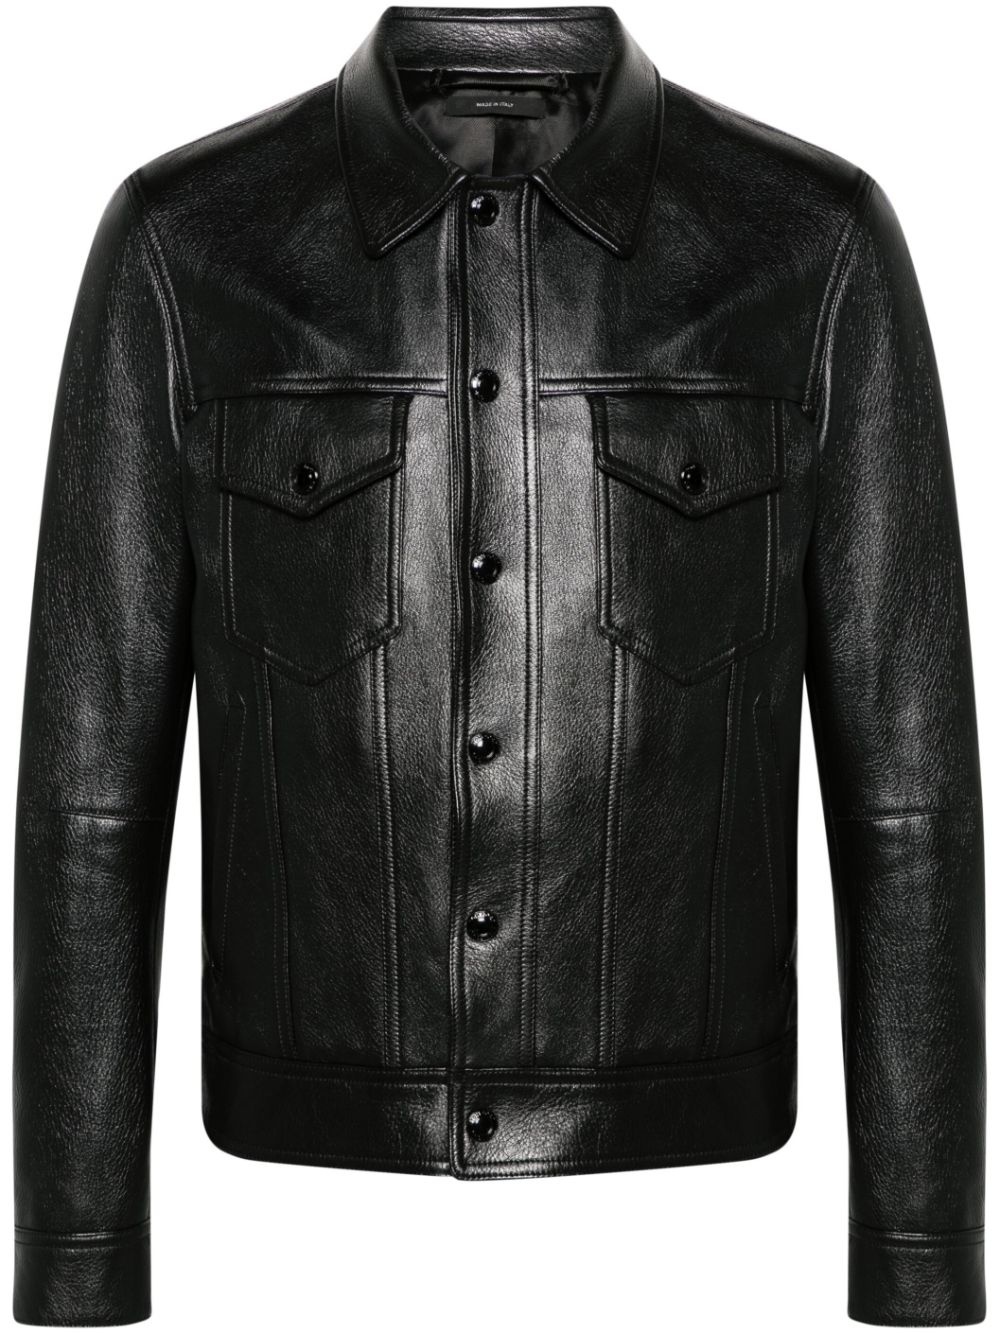 classic-collar leather jacket - 1